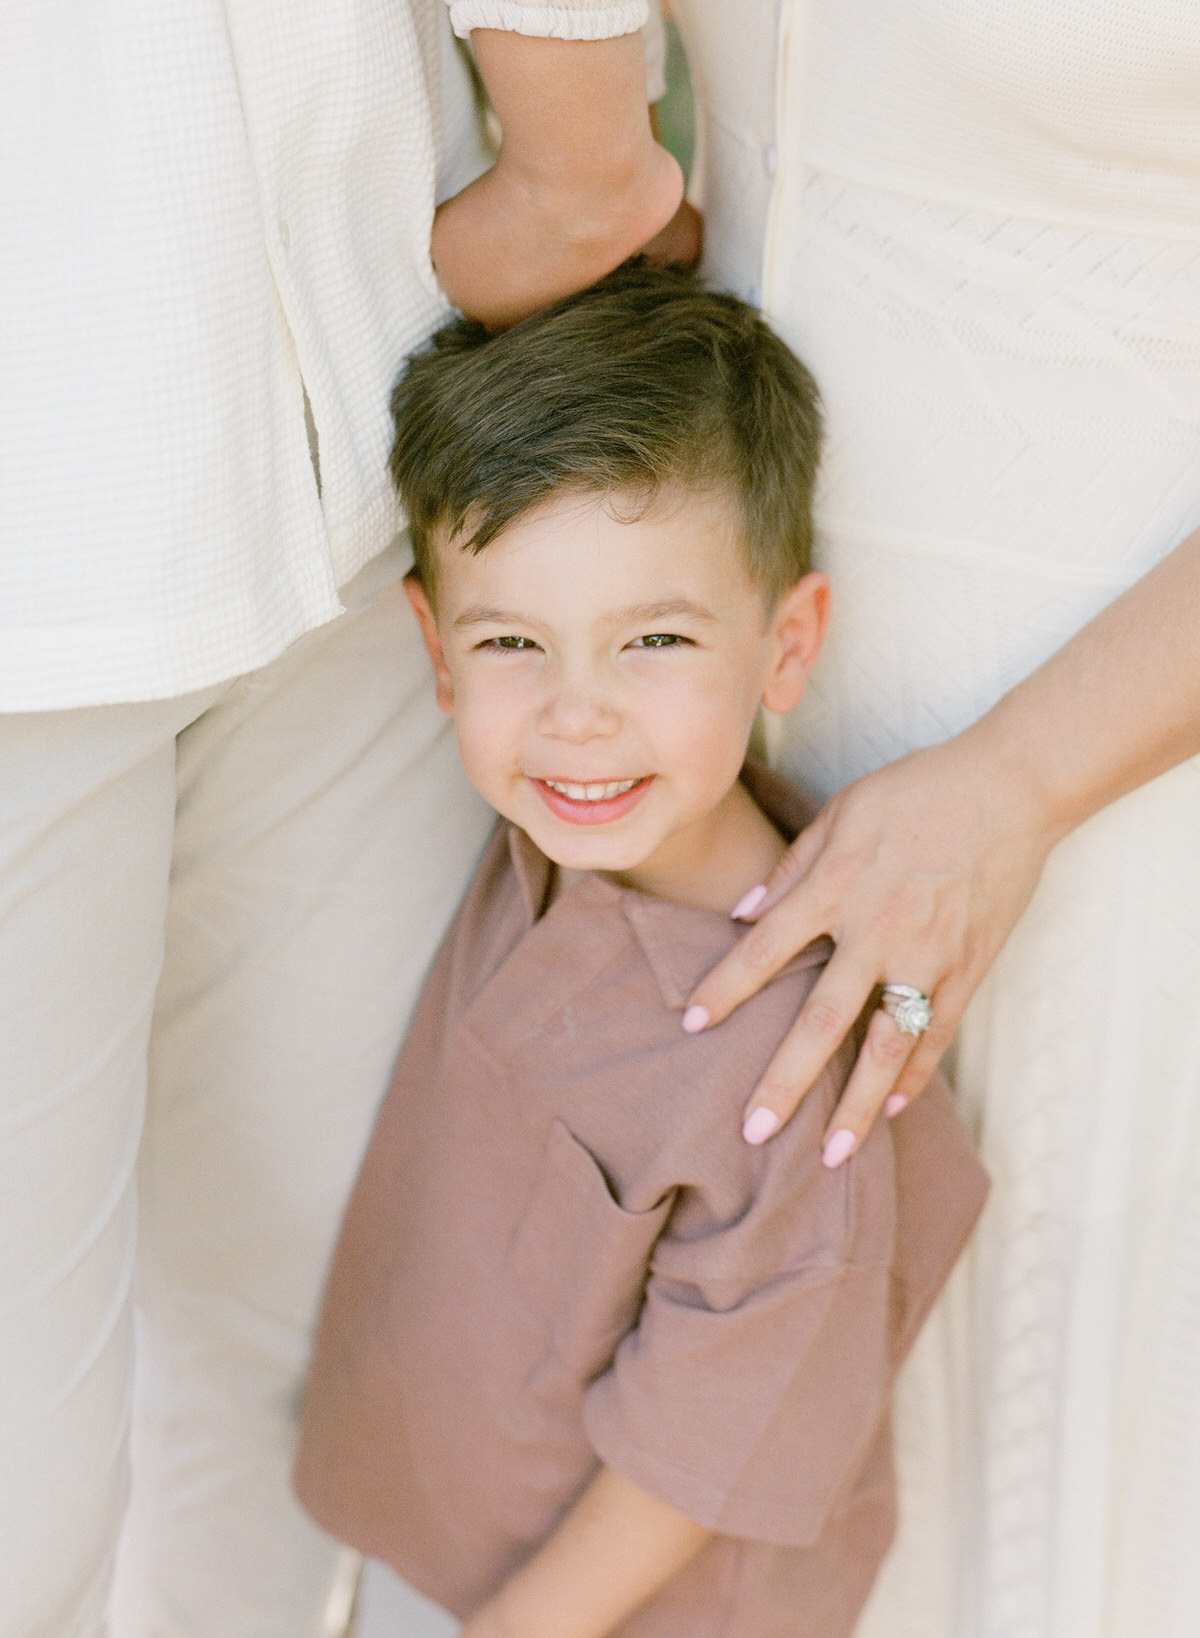 11 Kent Avenue Photography Light and Airy Charlotte Family Photography On Film